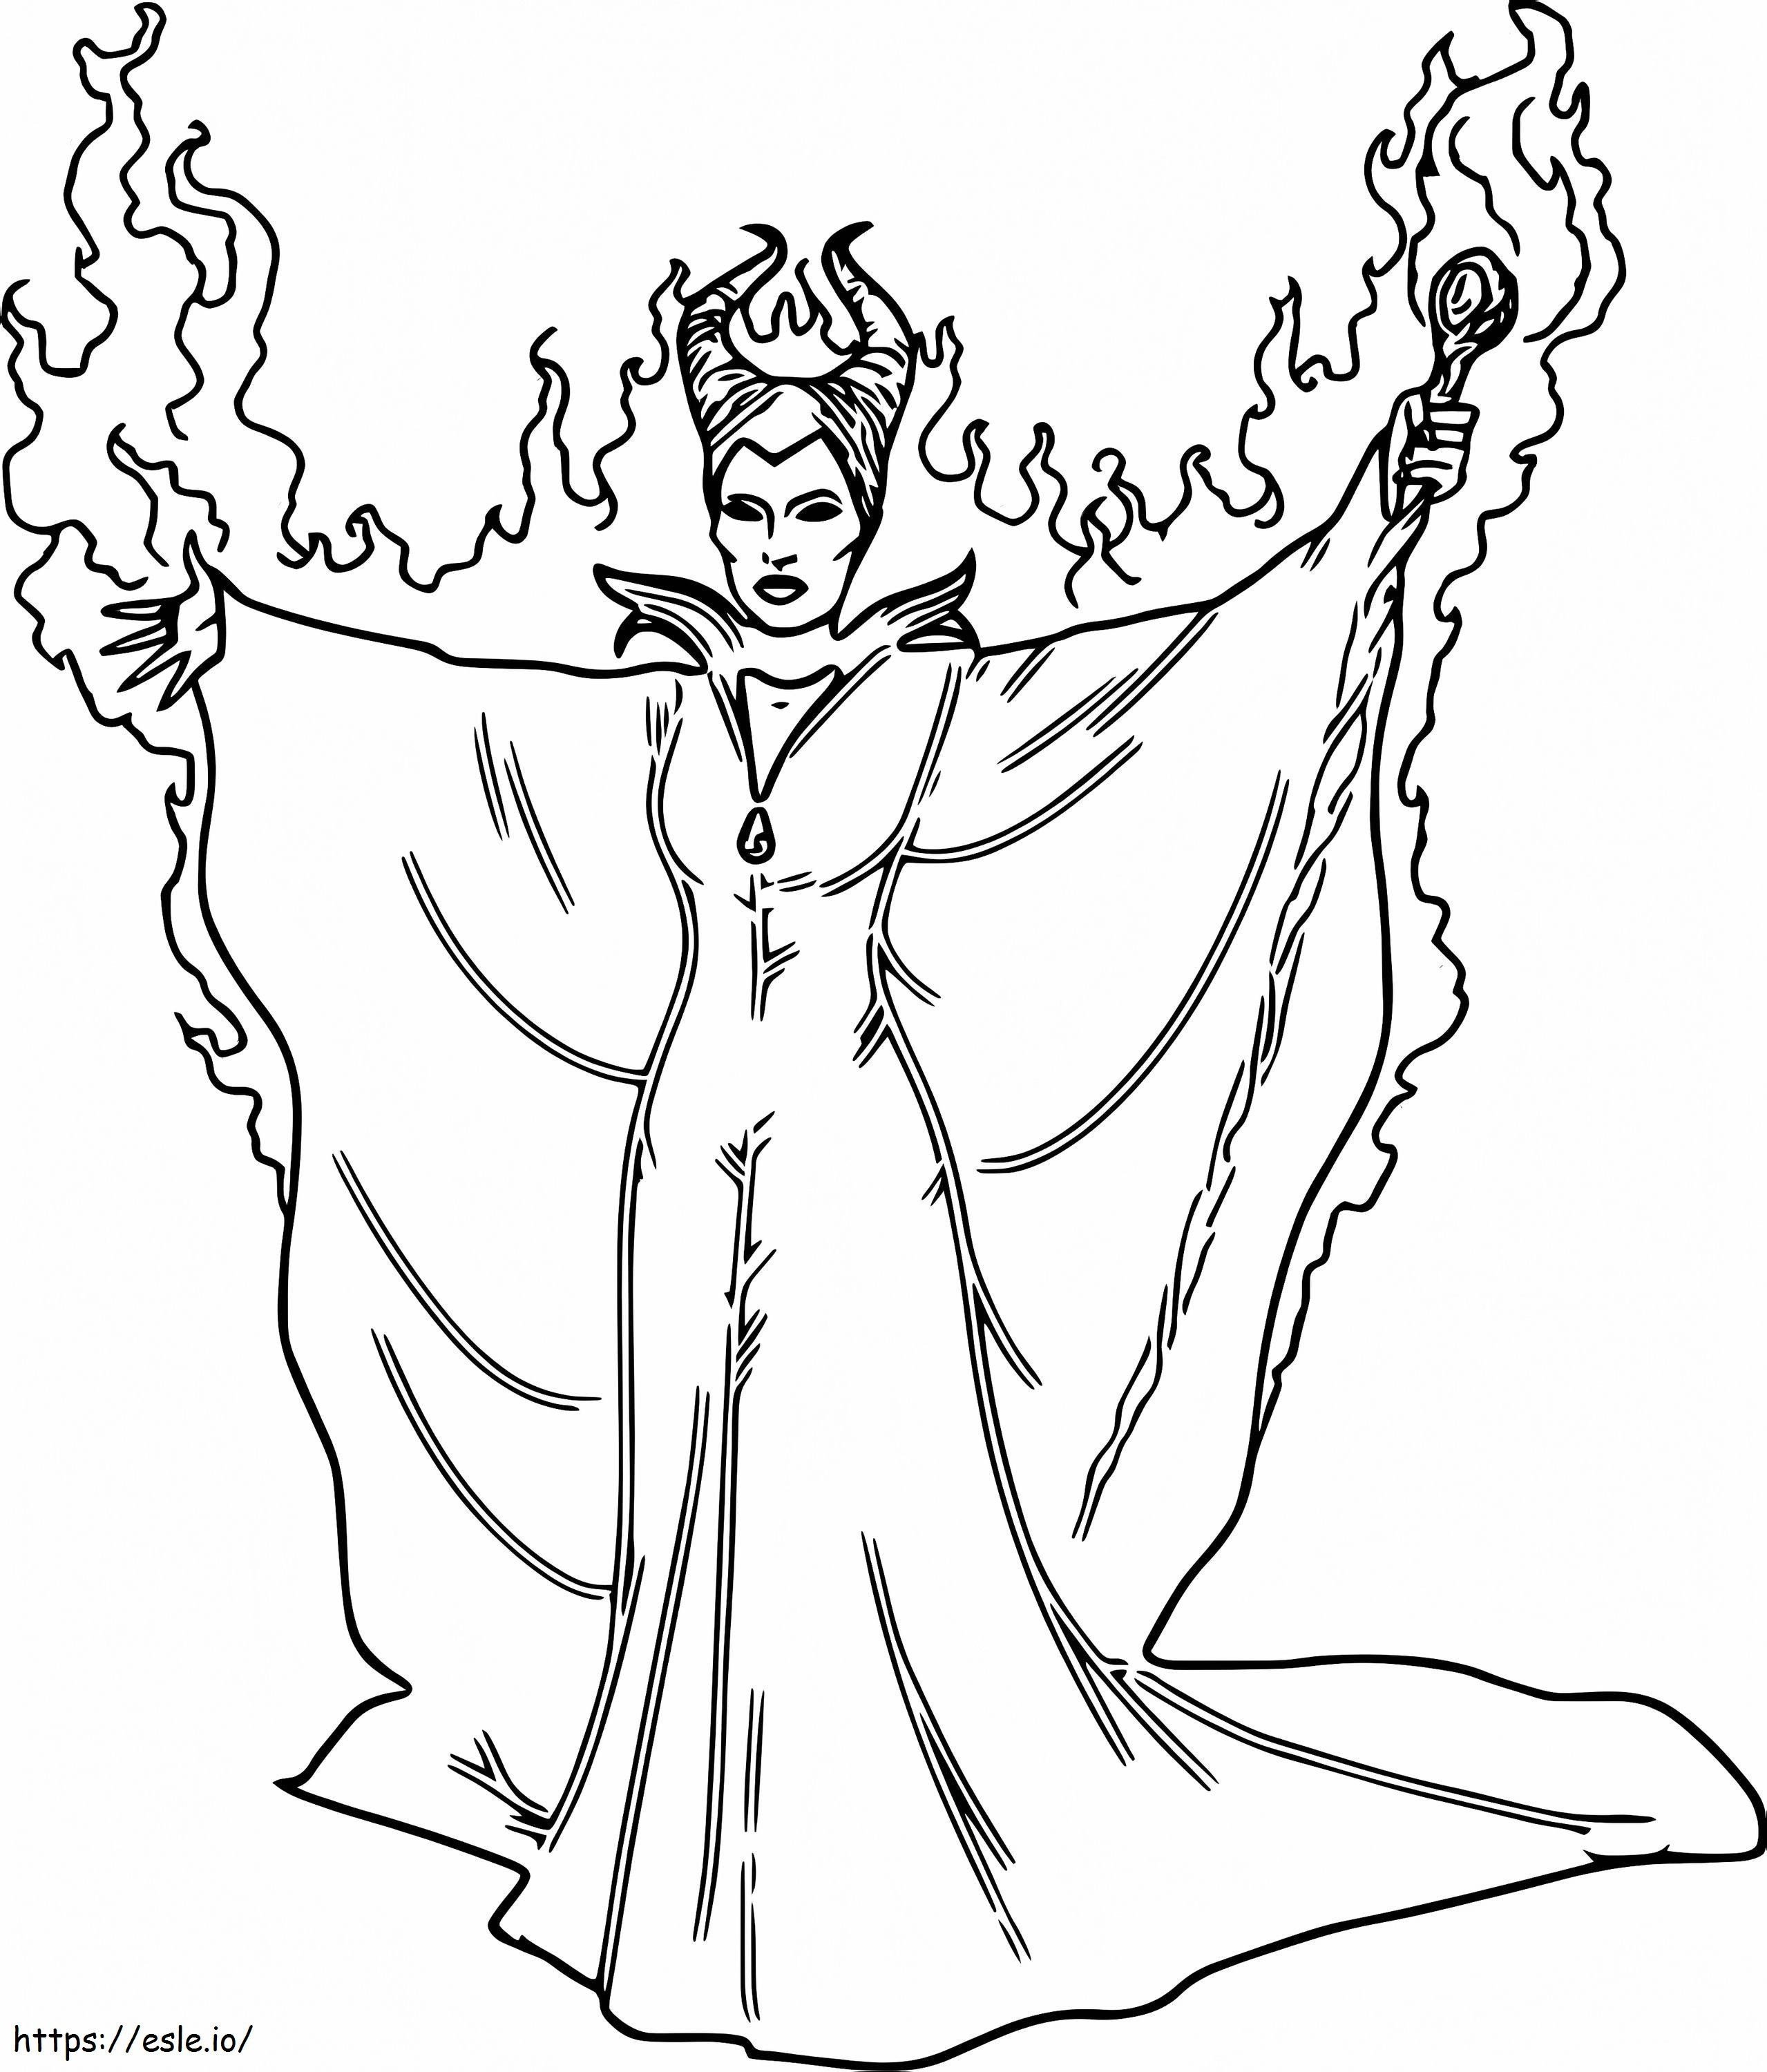 Maleficents Power coloring page